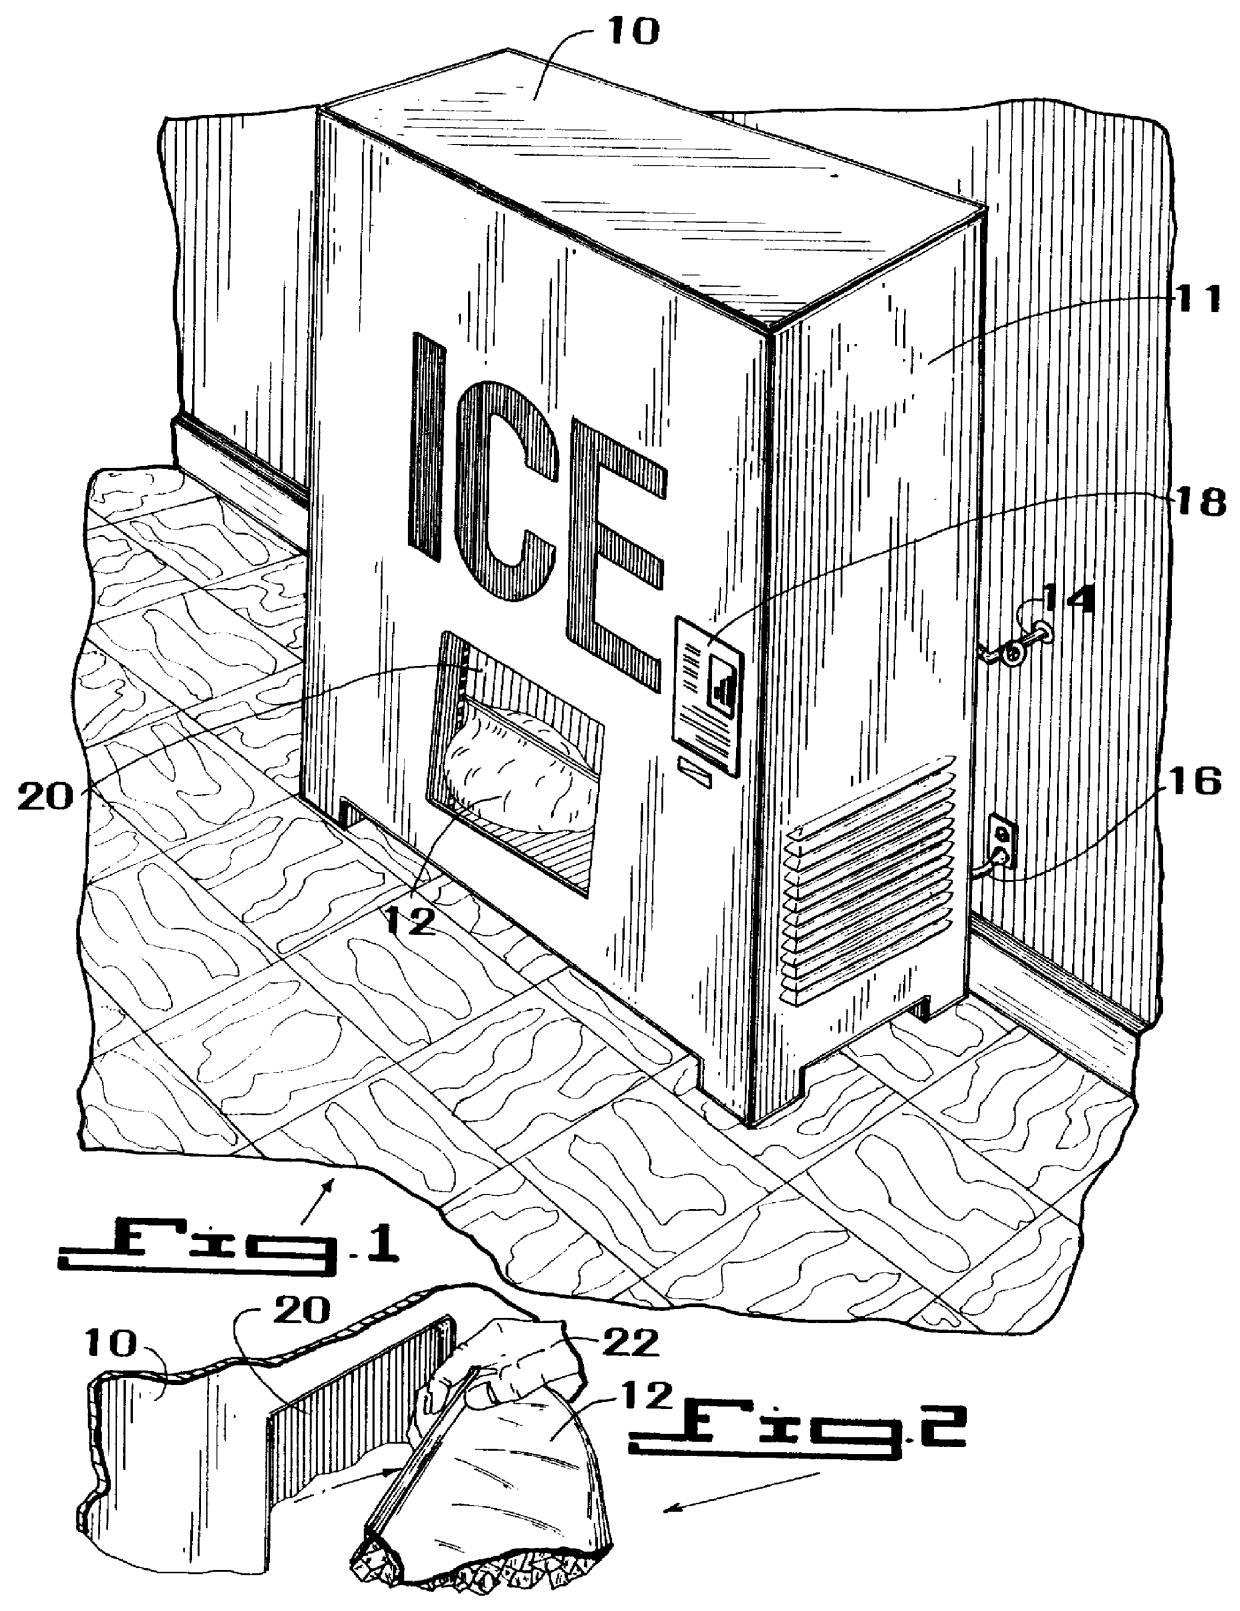 Ice making and bagging vending machine